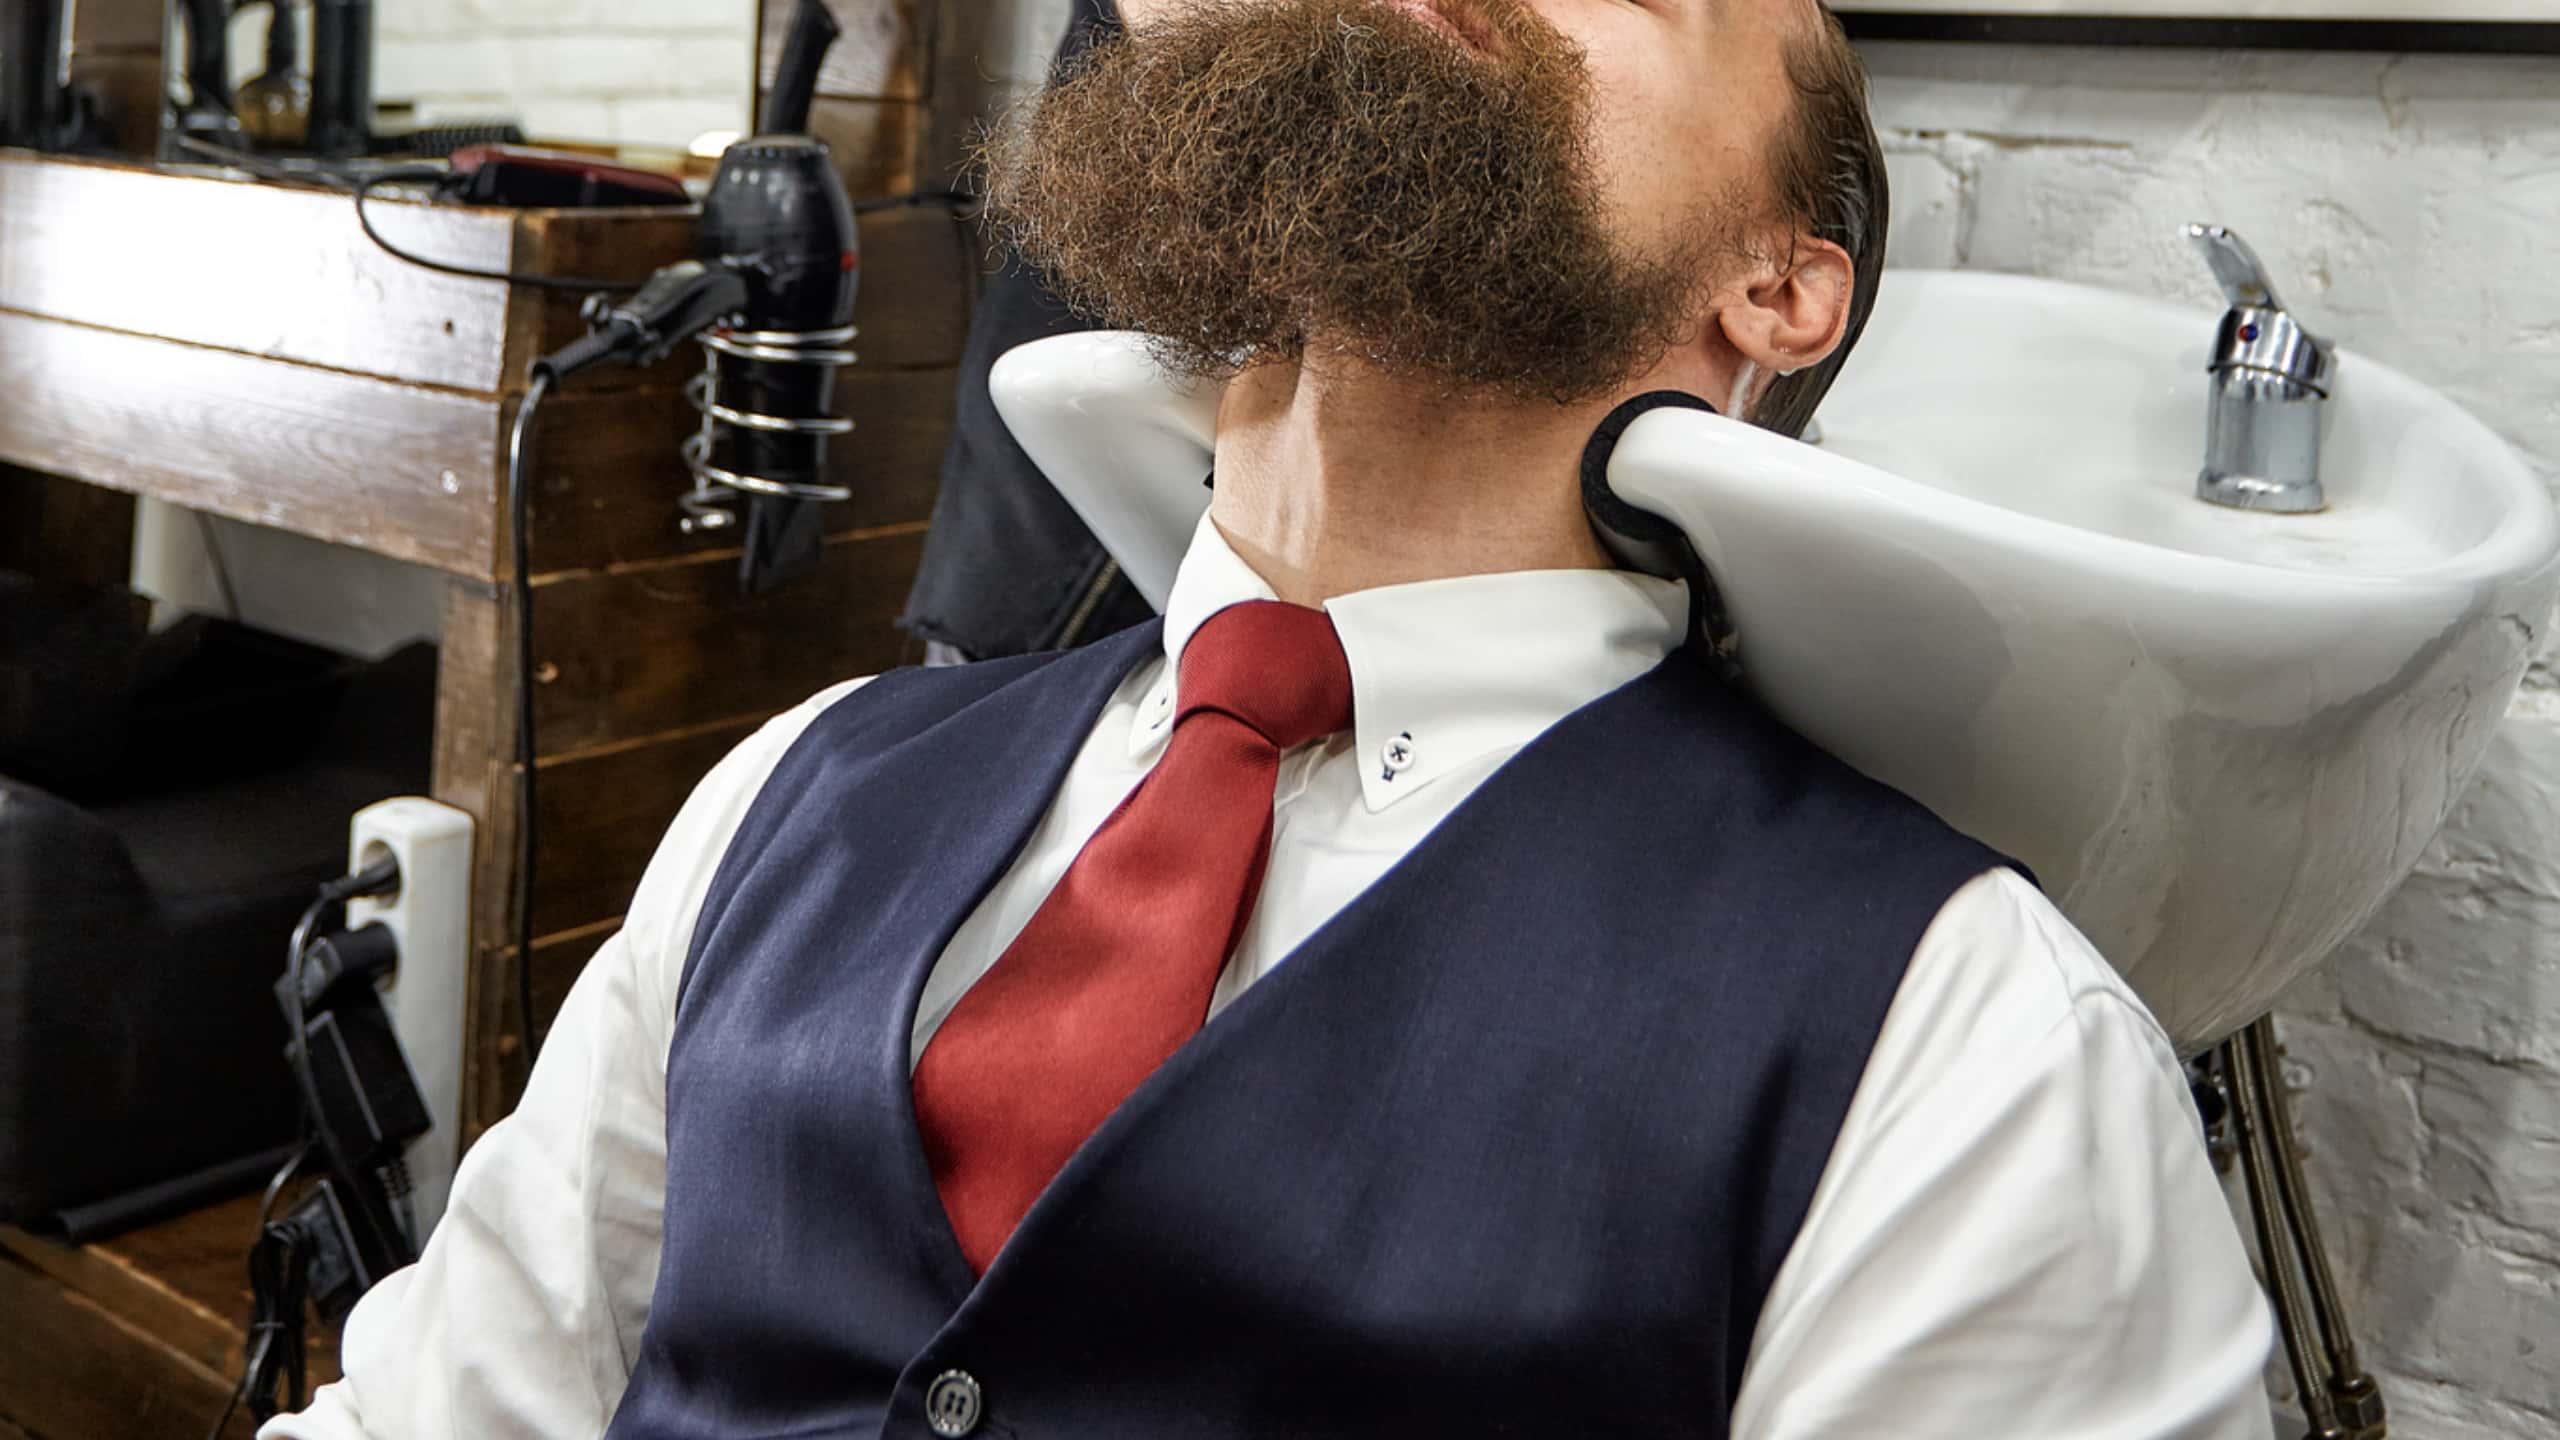 How to Maintain Your Beard's Natural Glow 